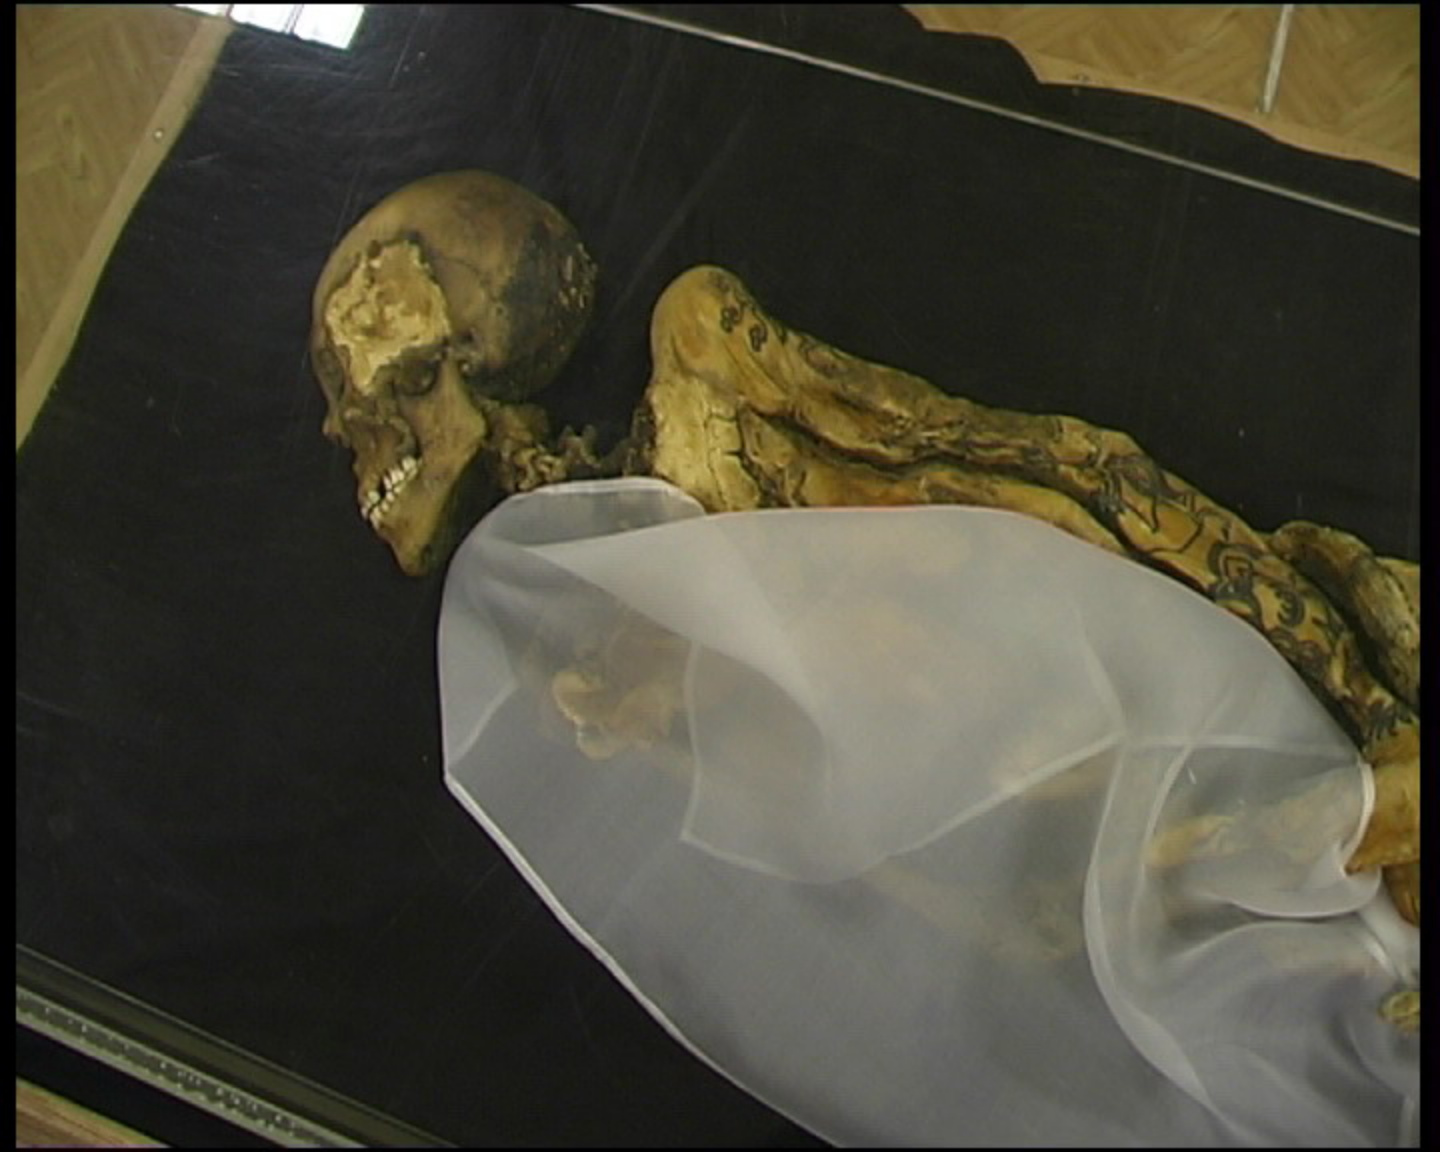 Princess Ukok/Princess of the Altai: A mummy that was found in 1993 in a kurgan in the remote Ukok Plateau in the Altai Republic in Russia